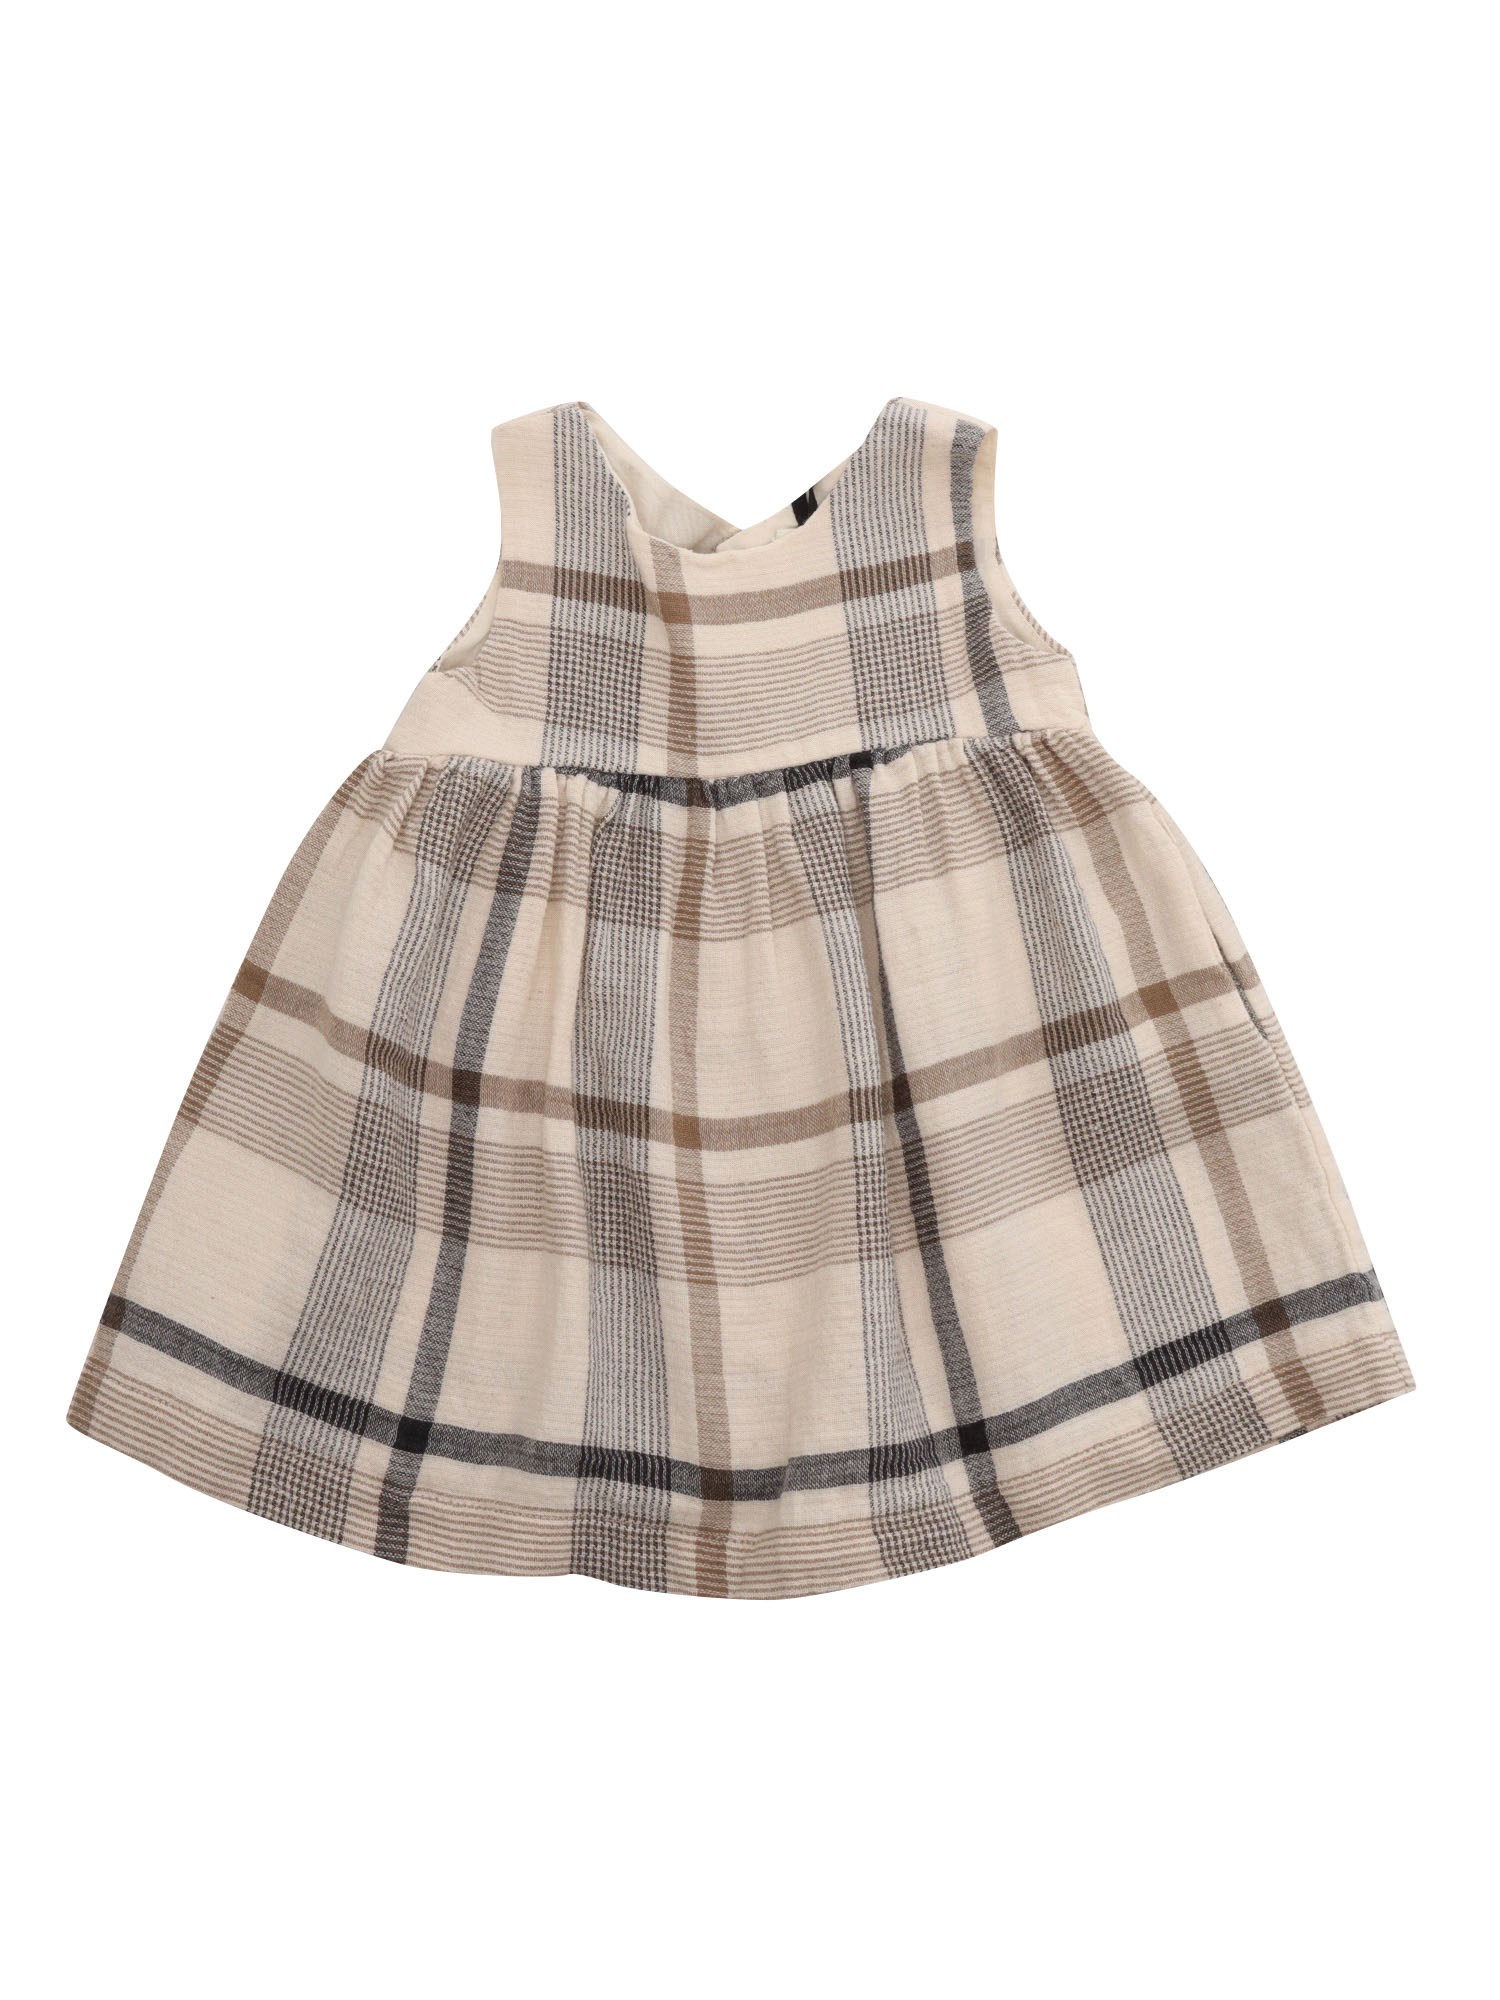 One More In The Family Sleeveless Tartan Dress In Gray